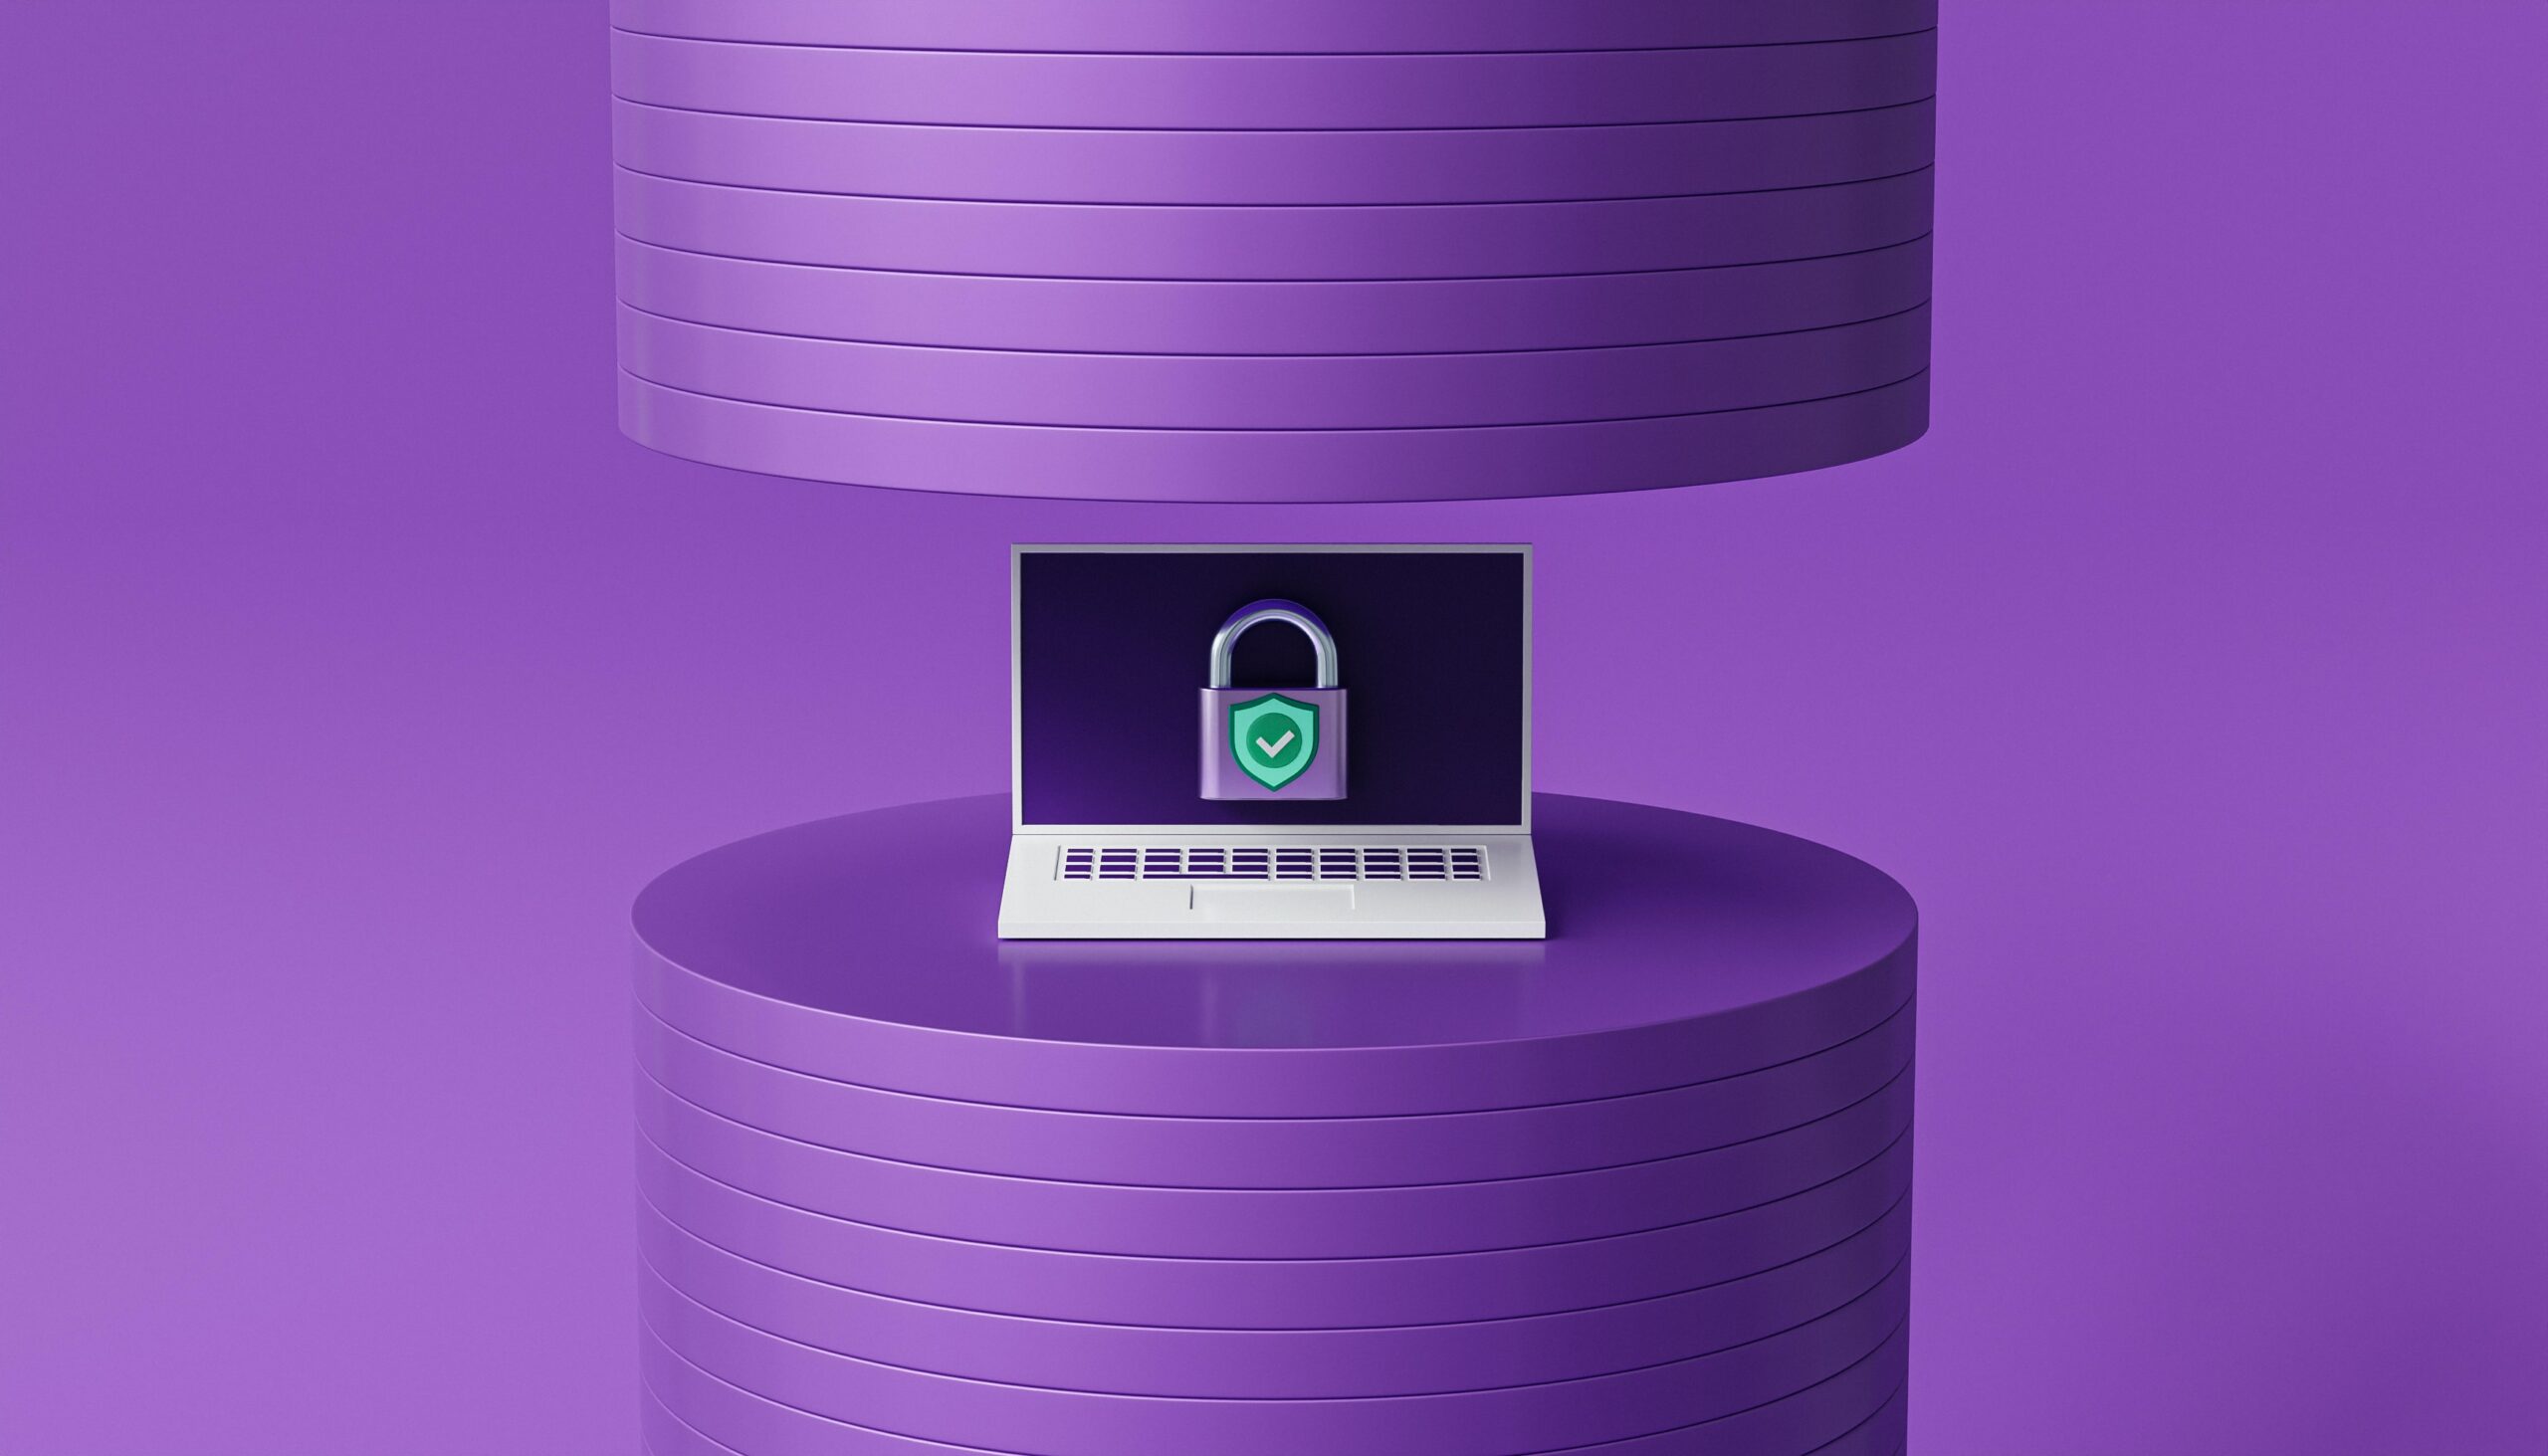 A laptop with a padlock on it on a purple background, symbolizing security through regular reses of Windows password.